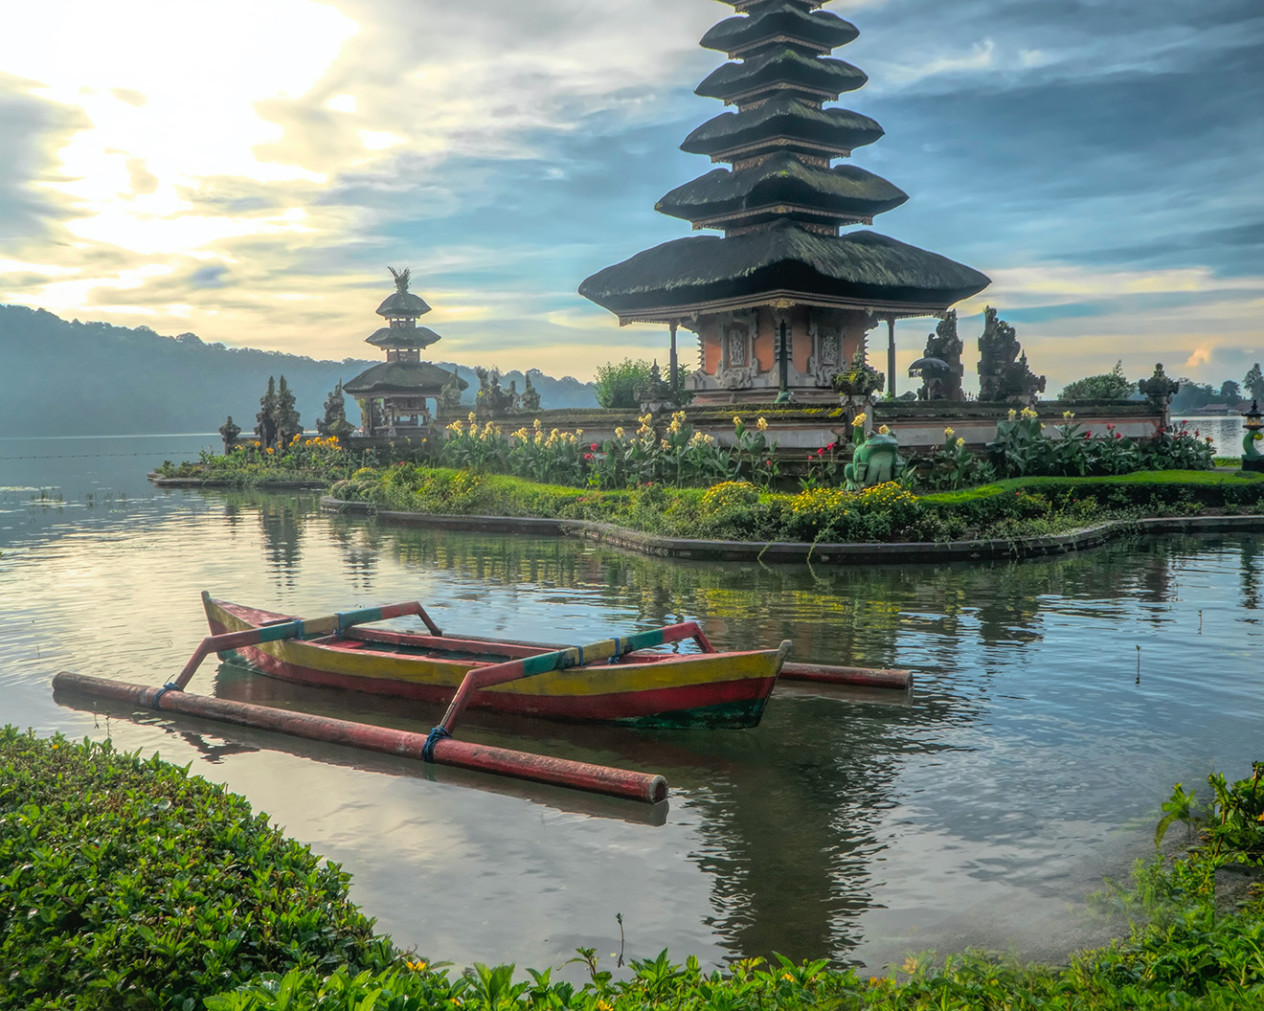 boat on the water in bali with green island and temple in background